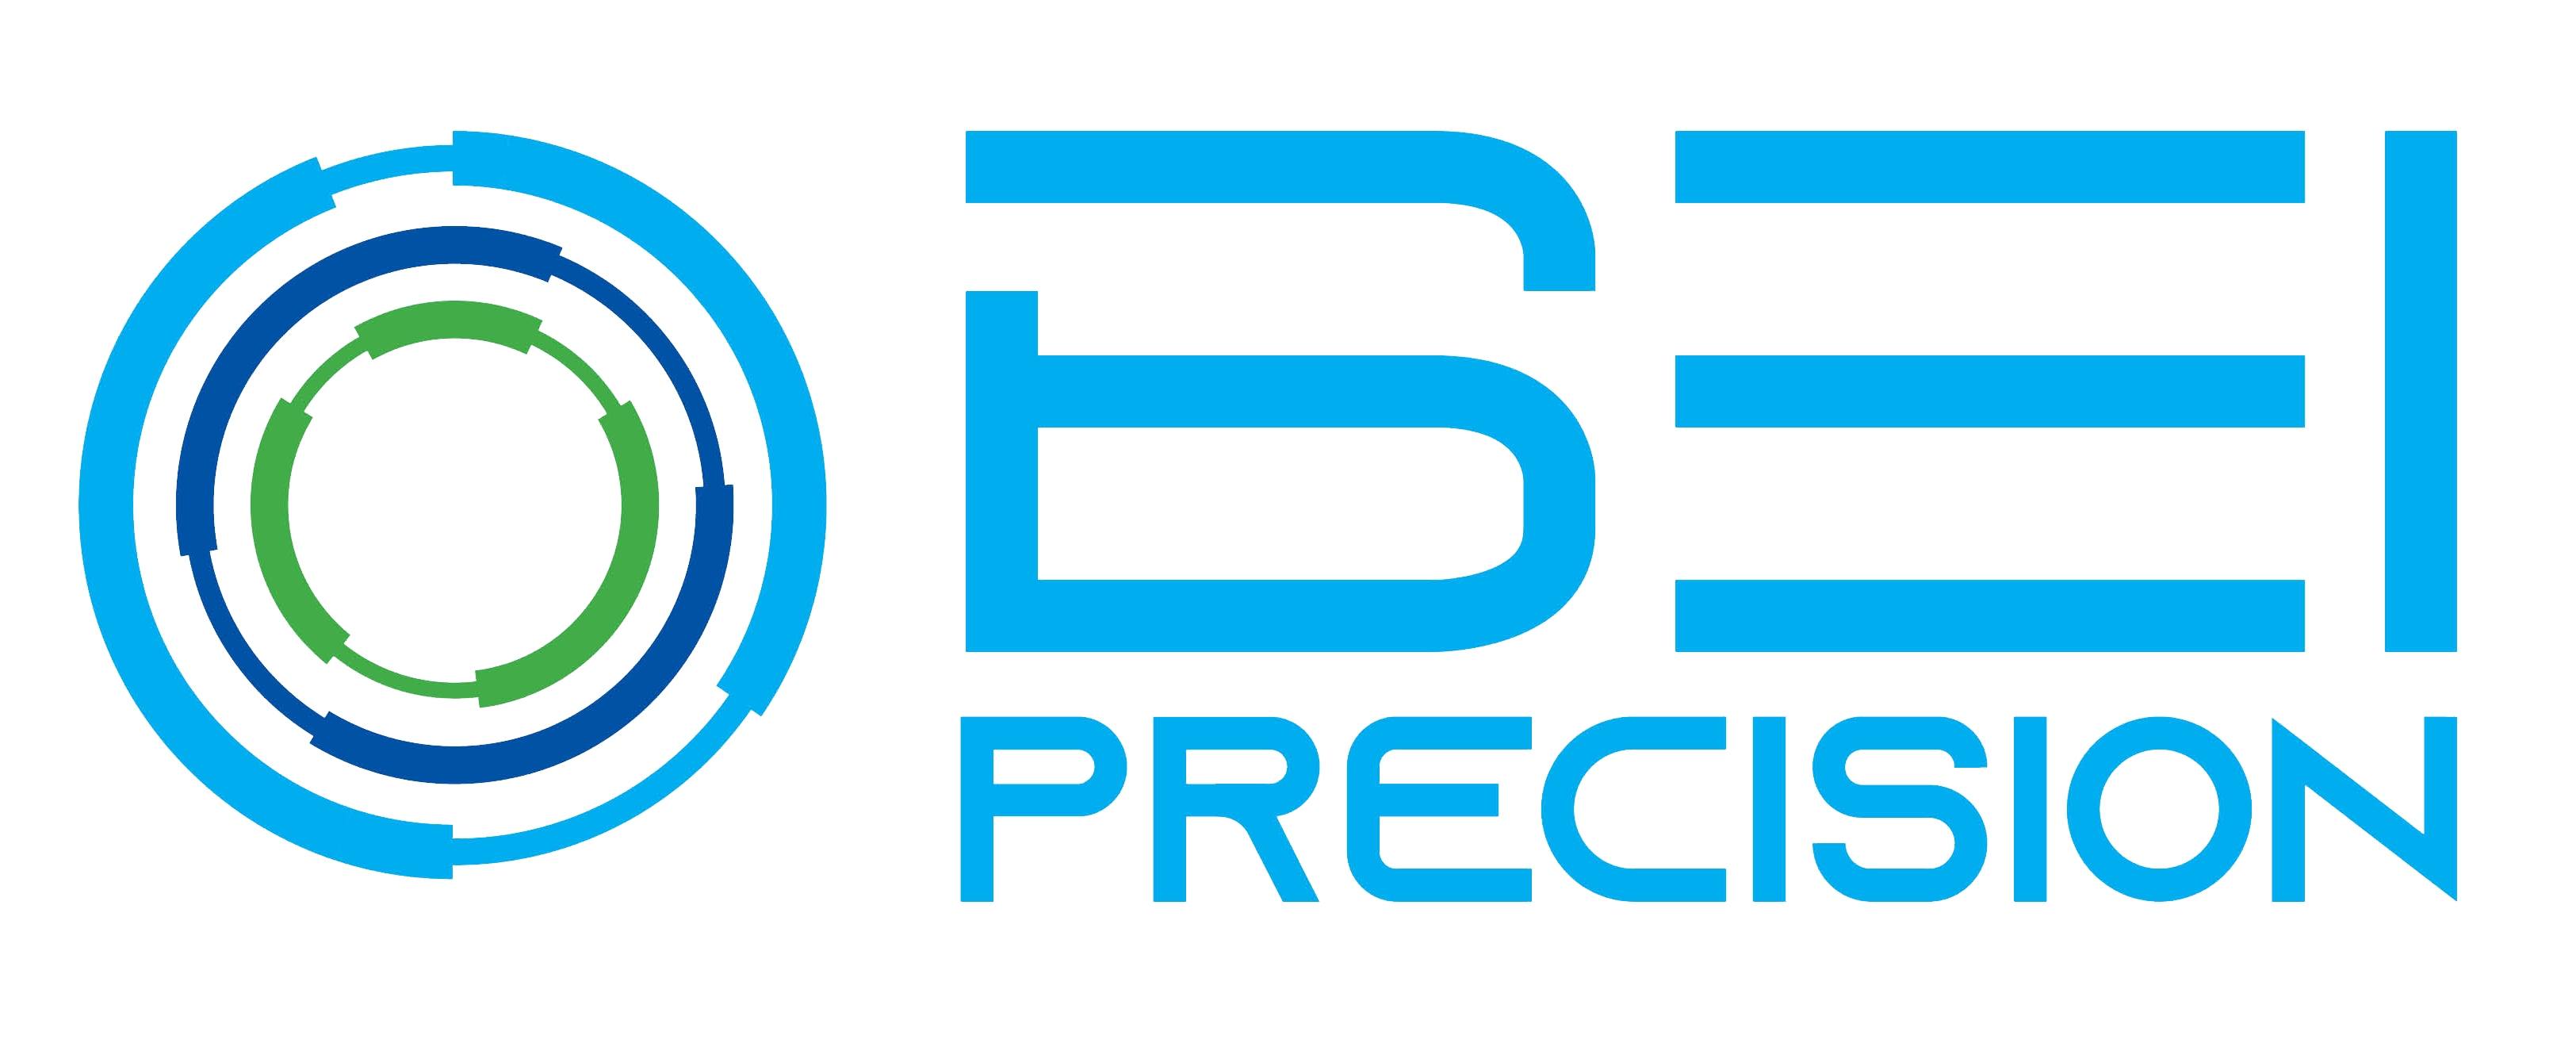 J.F. Lehman & Company Acquires BEI Precision Systems & Space Company, May 4 2017